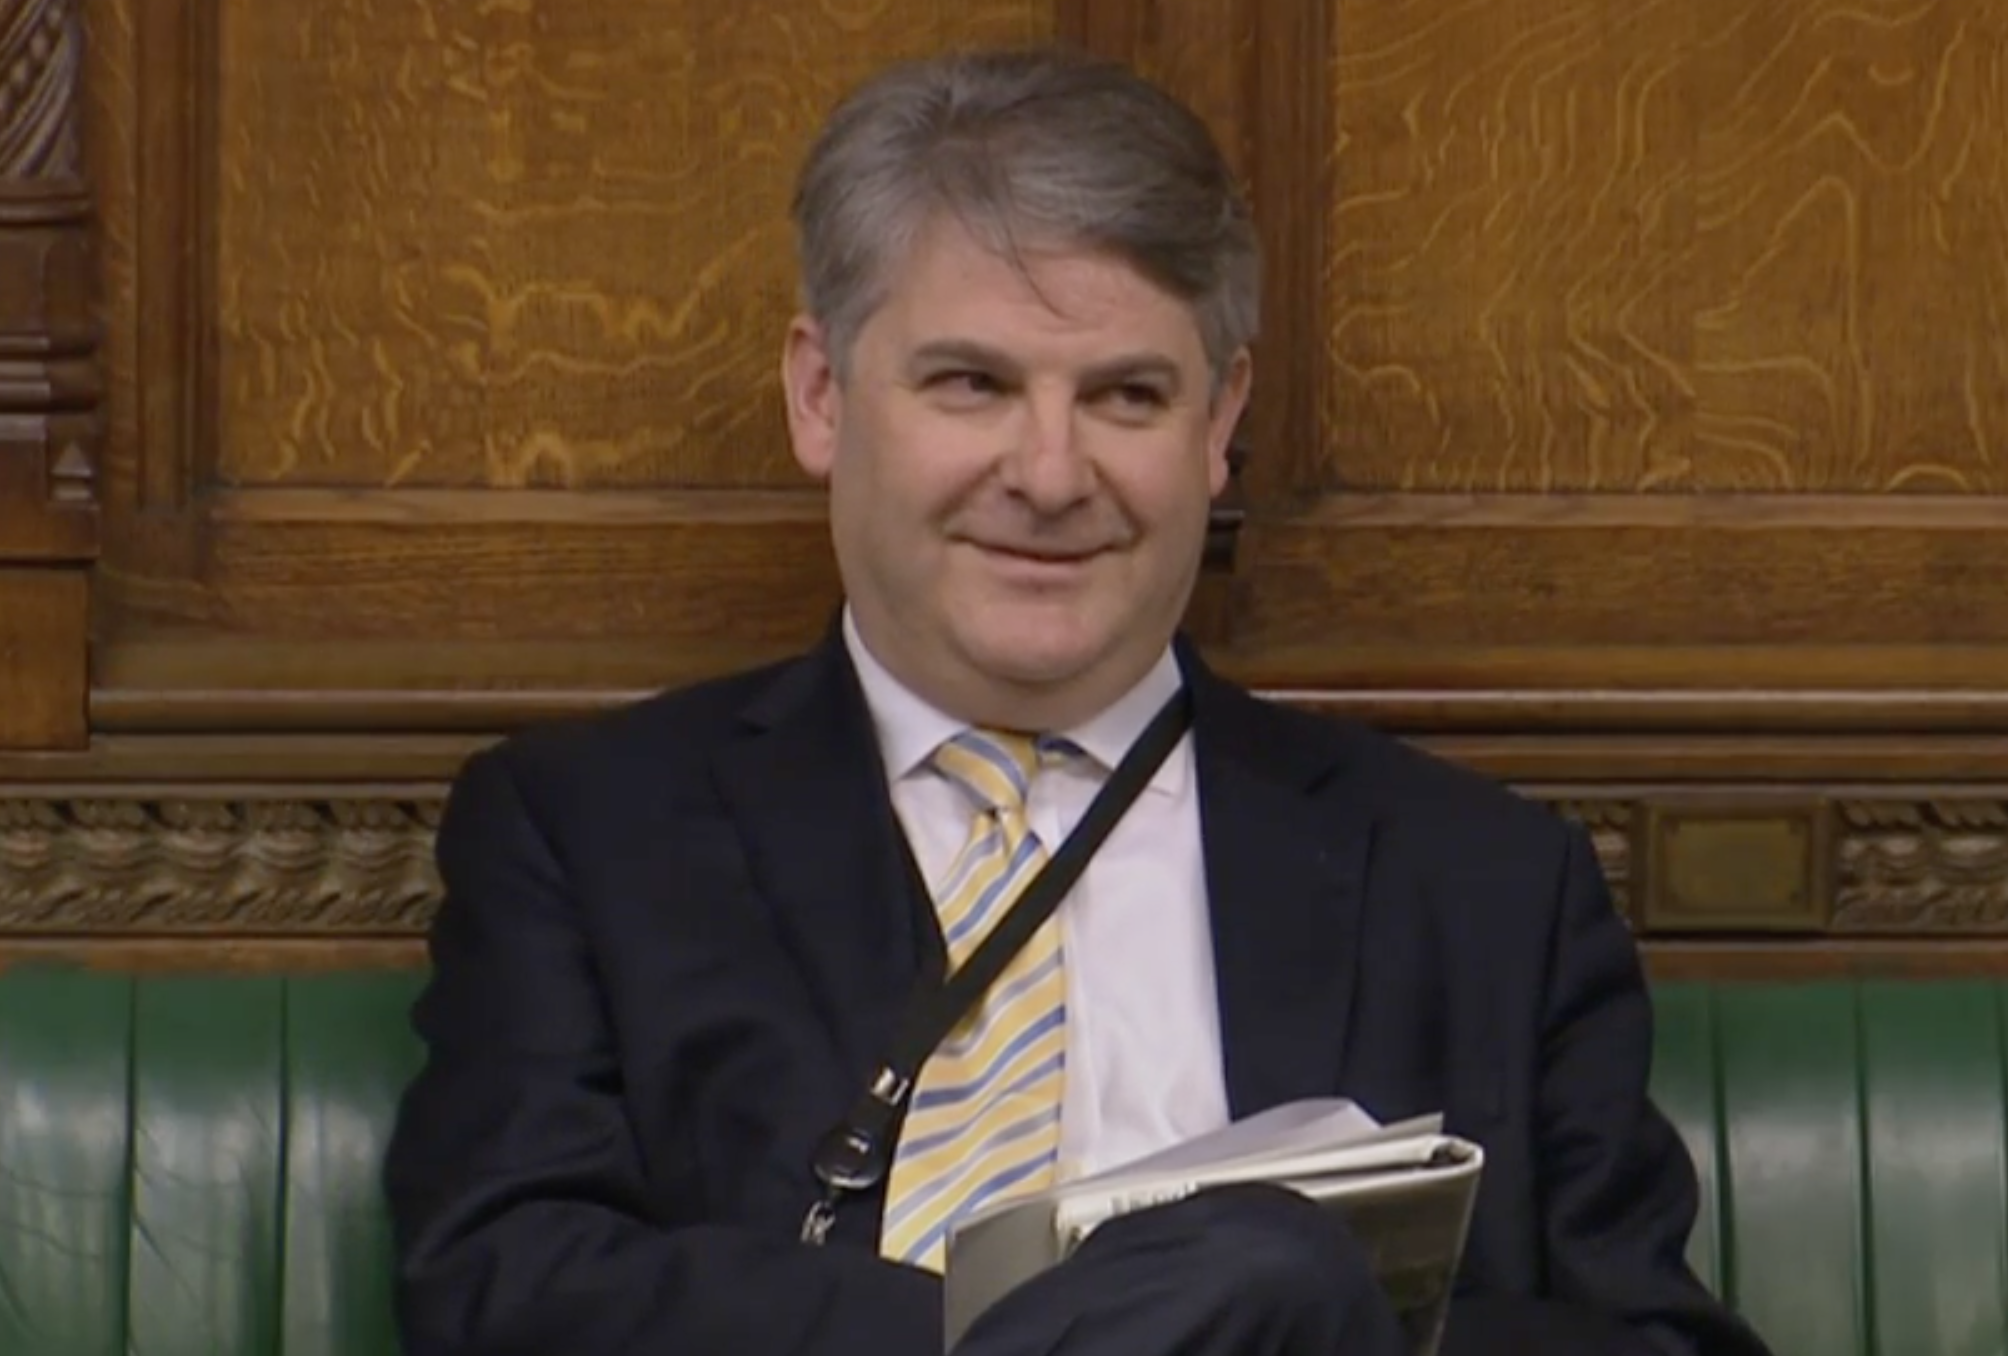 Conservative MP Philip Davies is a longstanding opponent of mask-wearing